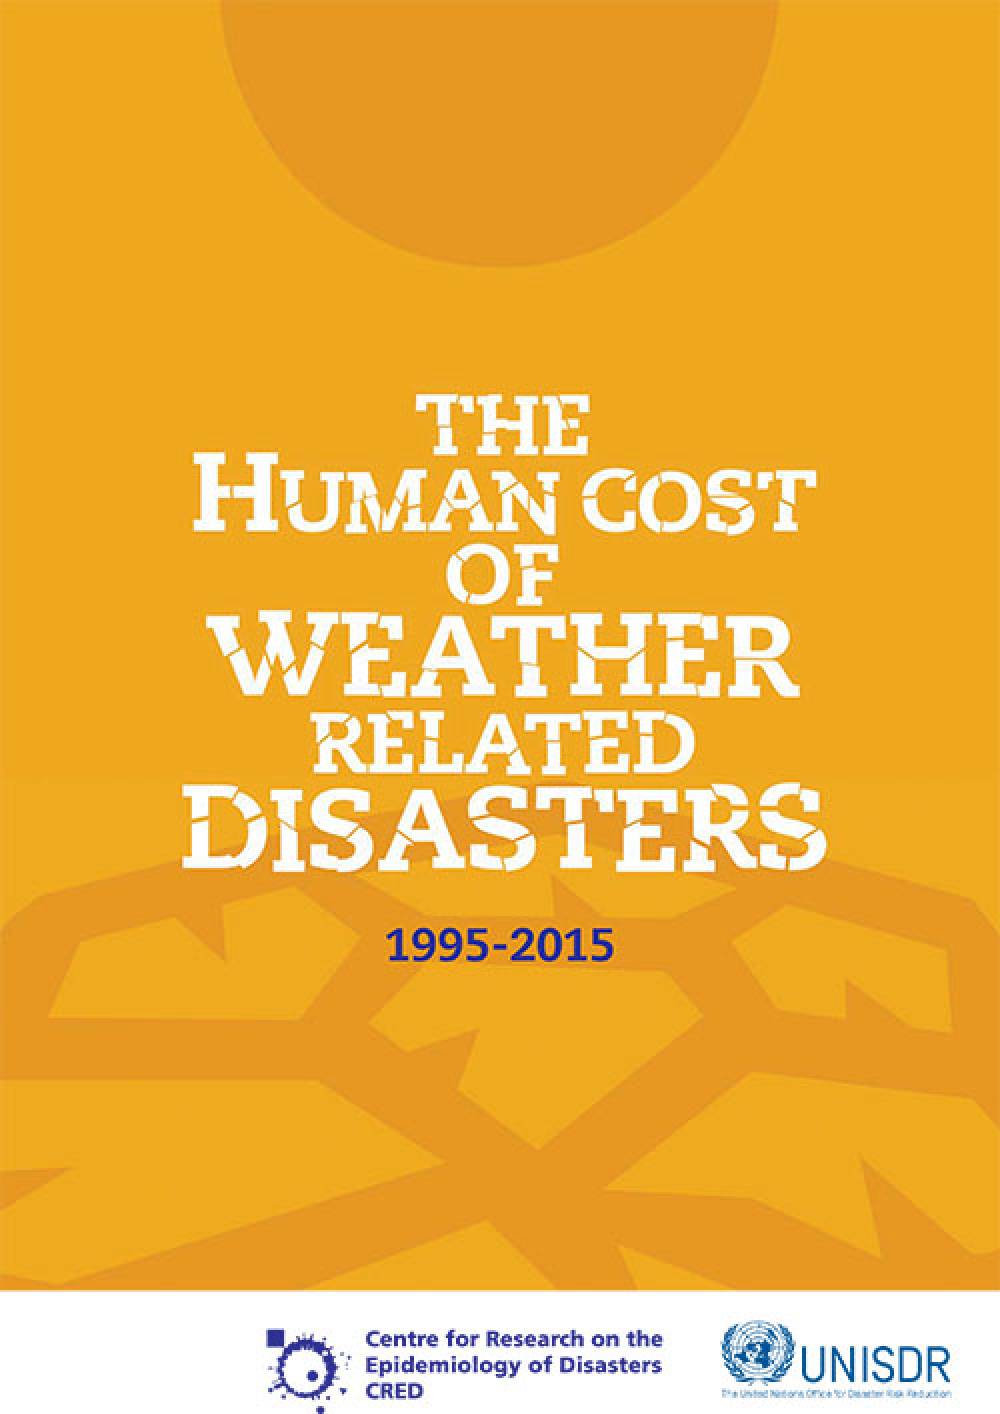 The Human Cost of Weather Related Disasters 1995-2015